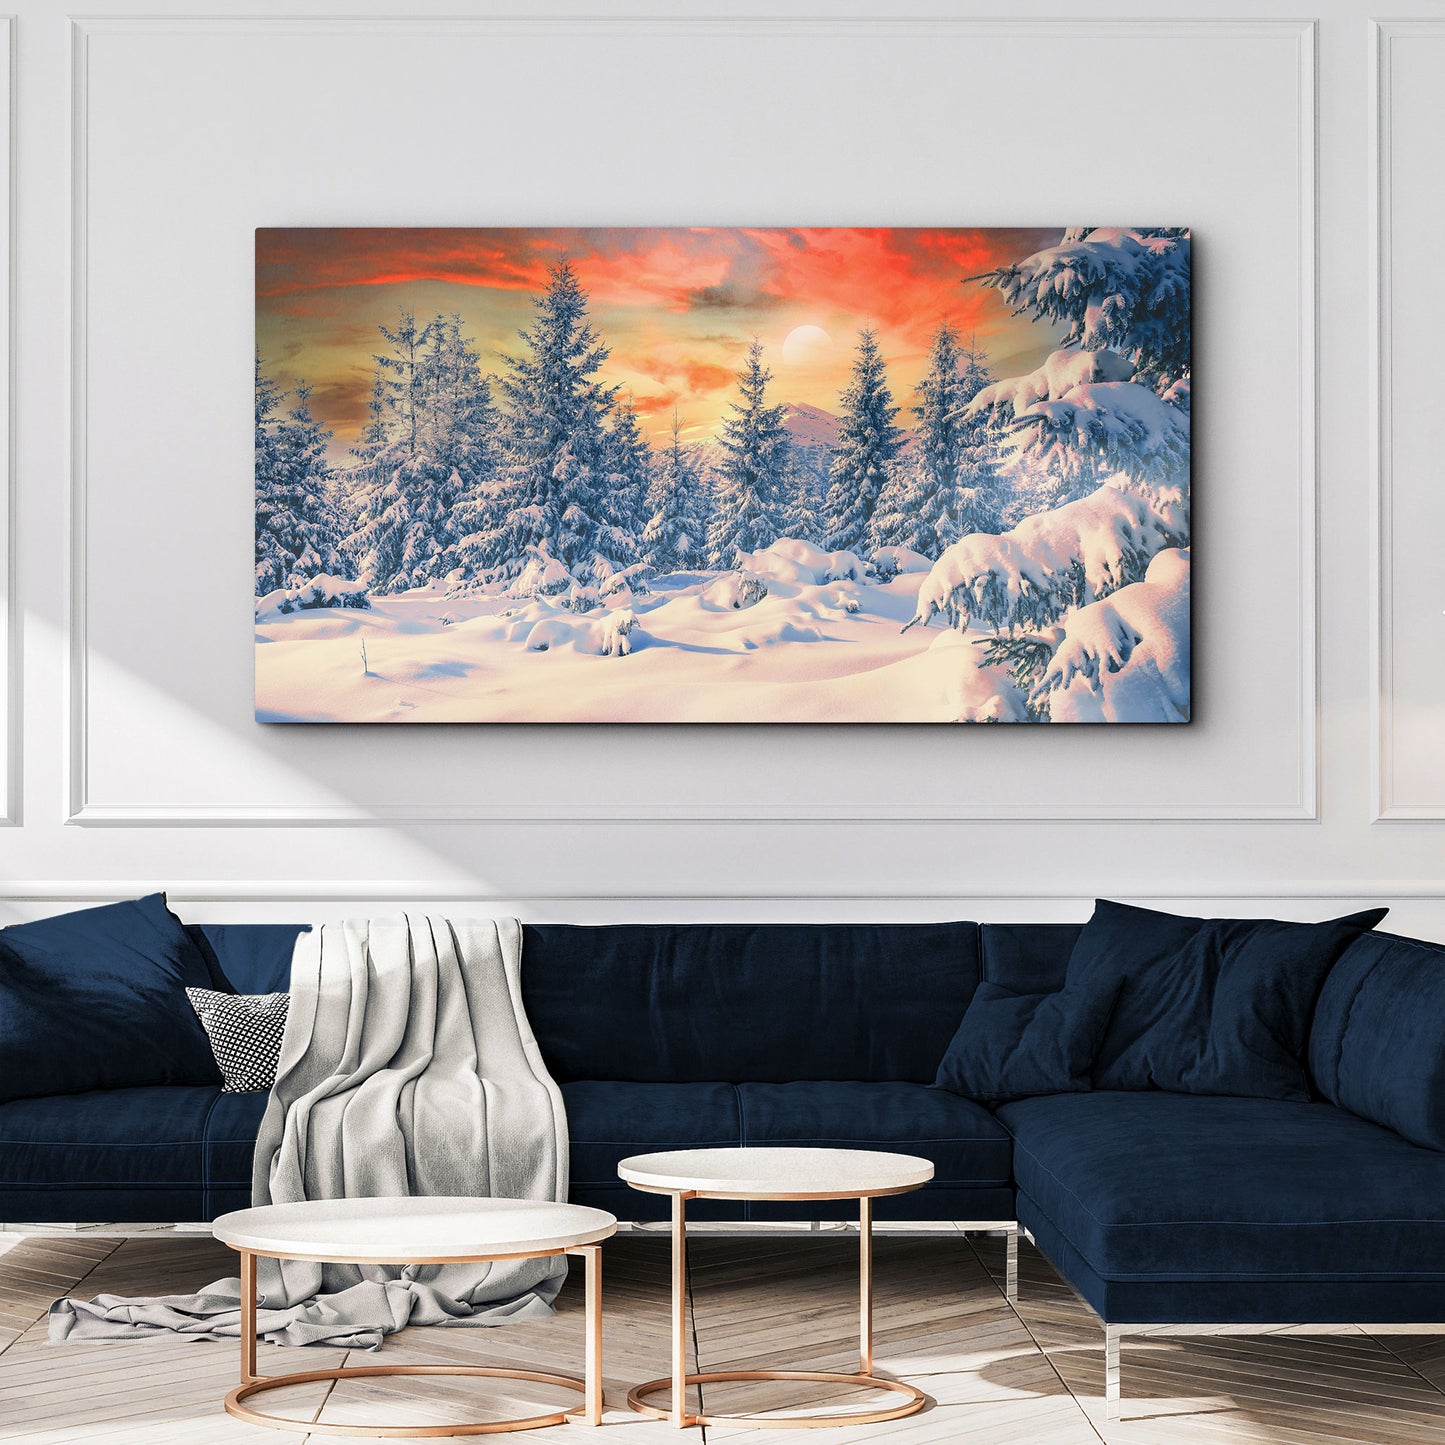 Sunset At Winter Forest Canvas Wall Art - Image by Tailored Canvases